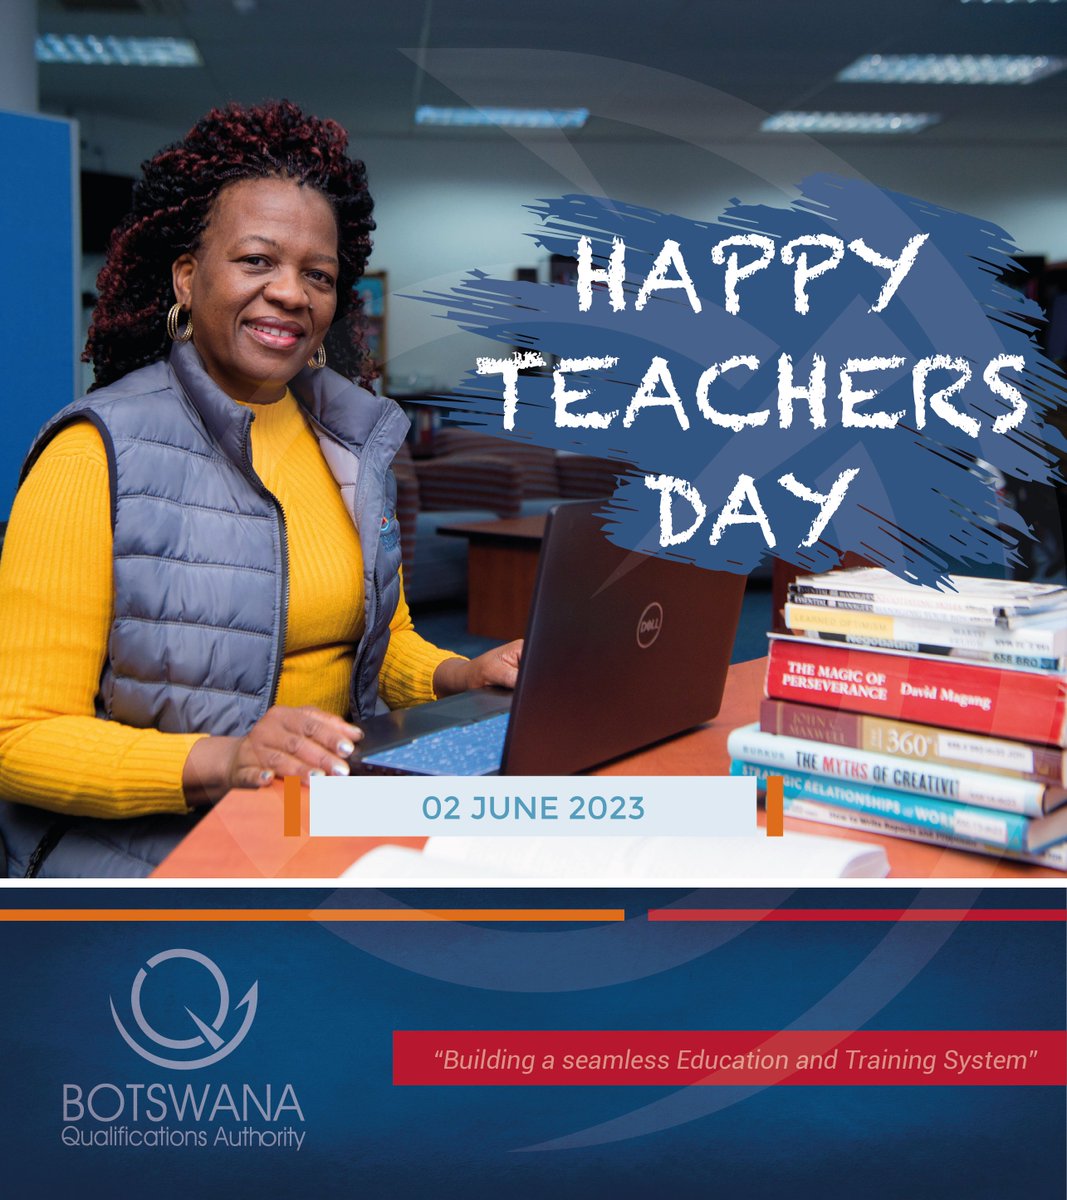 Happy Teachers Day!

Botswana Qualifications Authority (BQA) appreciates the role teachers play in 'Building a seamless Education and Training System' in Botswana.

#BQA
#education
#teachersday
#Botswana